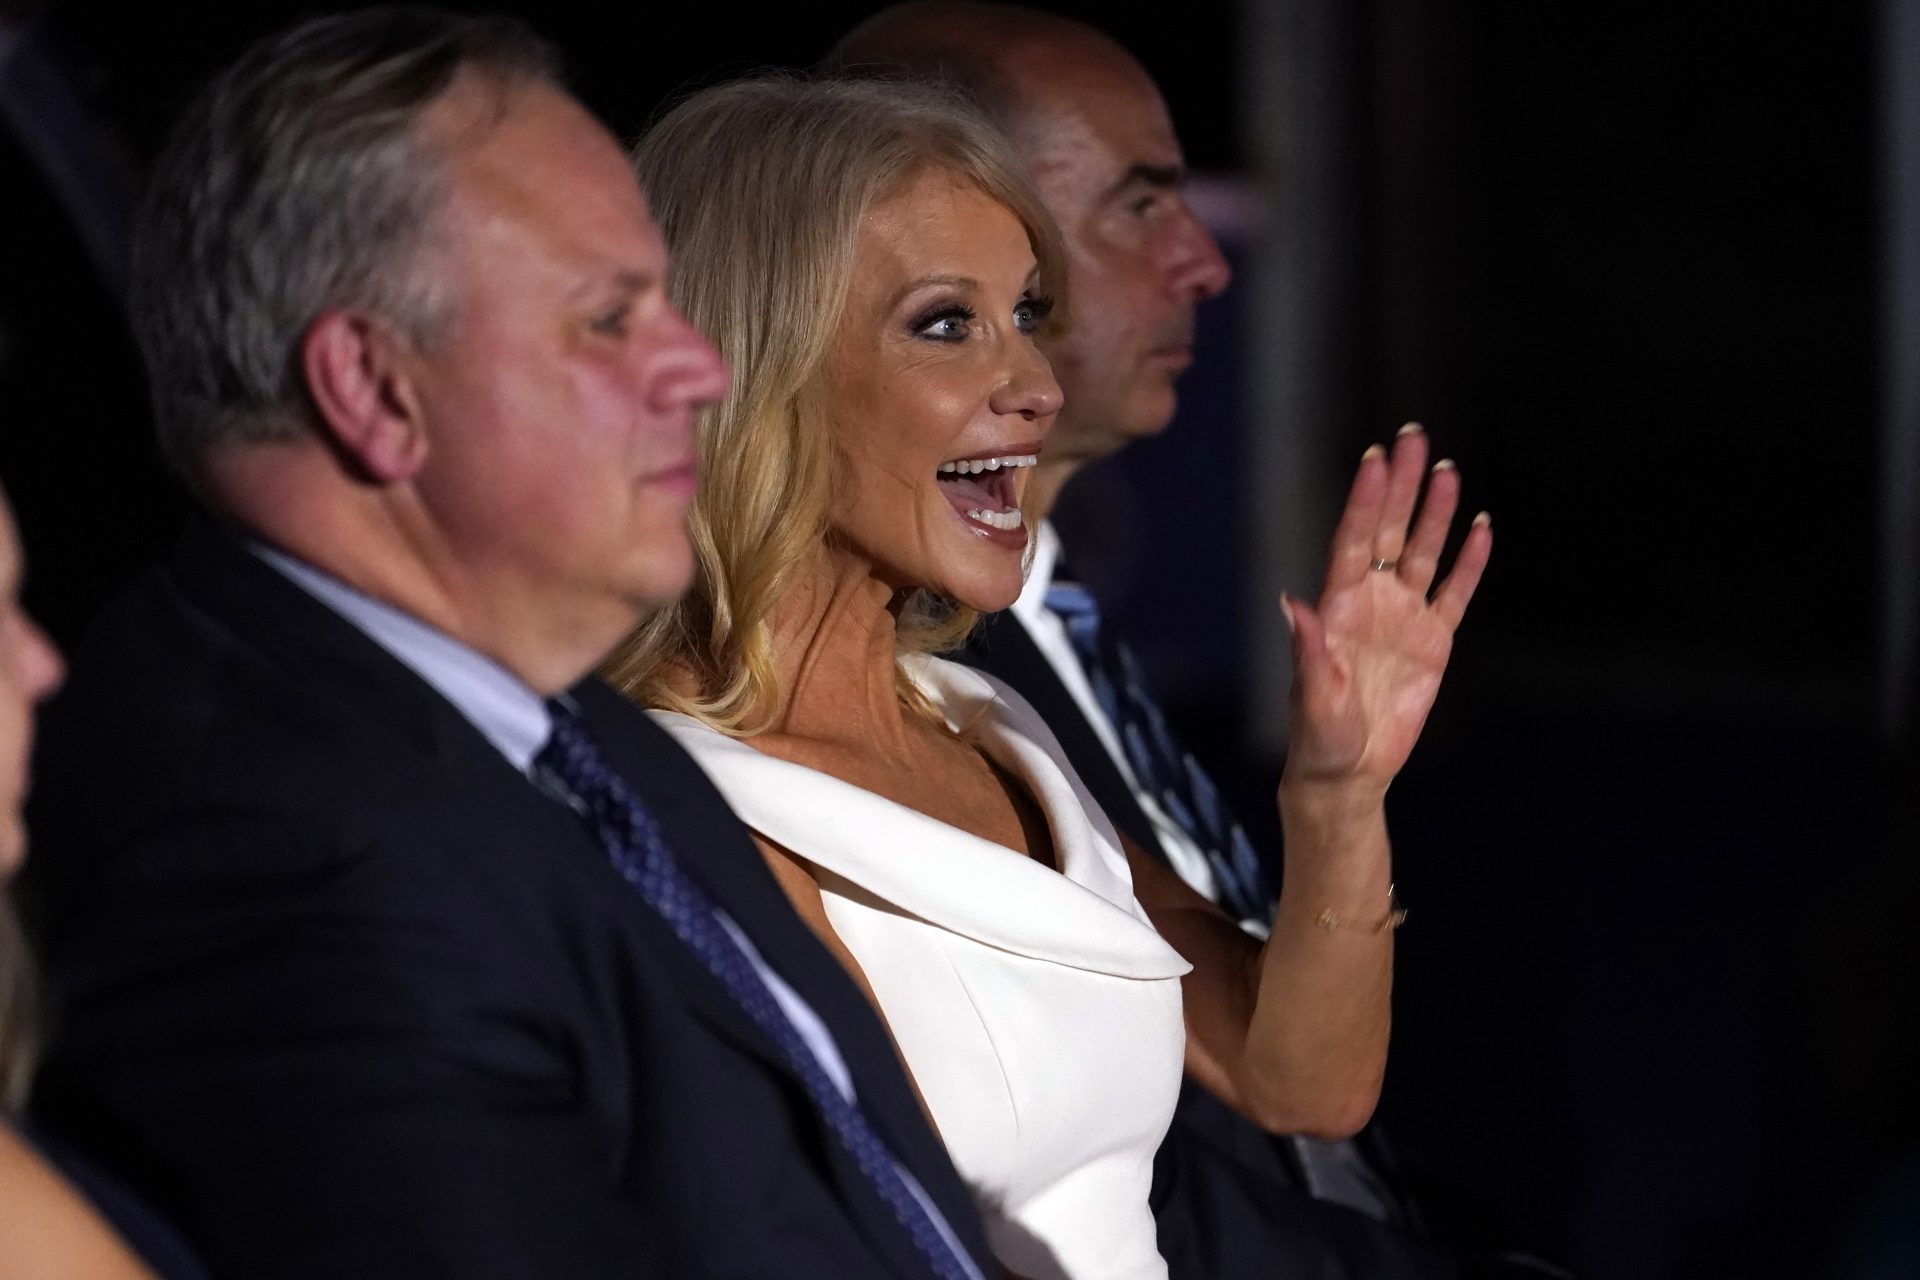 White House counselor Kellyanne Conway waves as she waits to hear Vice President Mike Pence speak on the third day of the Republican National Convention at Fort McHenry National Monument and Historic Shrine in Baltimore, Wednesday, Aug. 26, 2020.